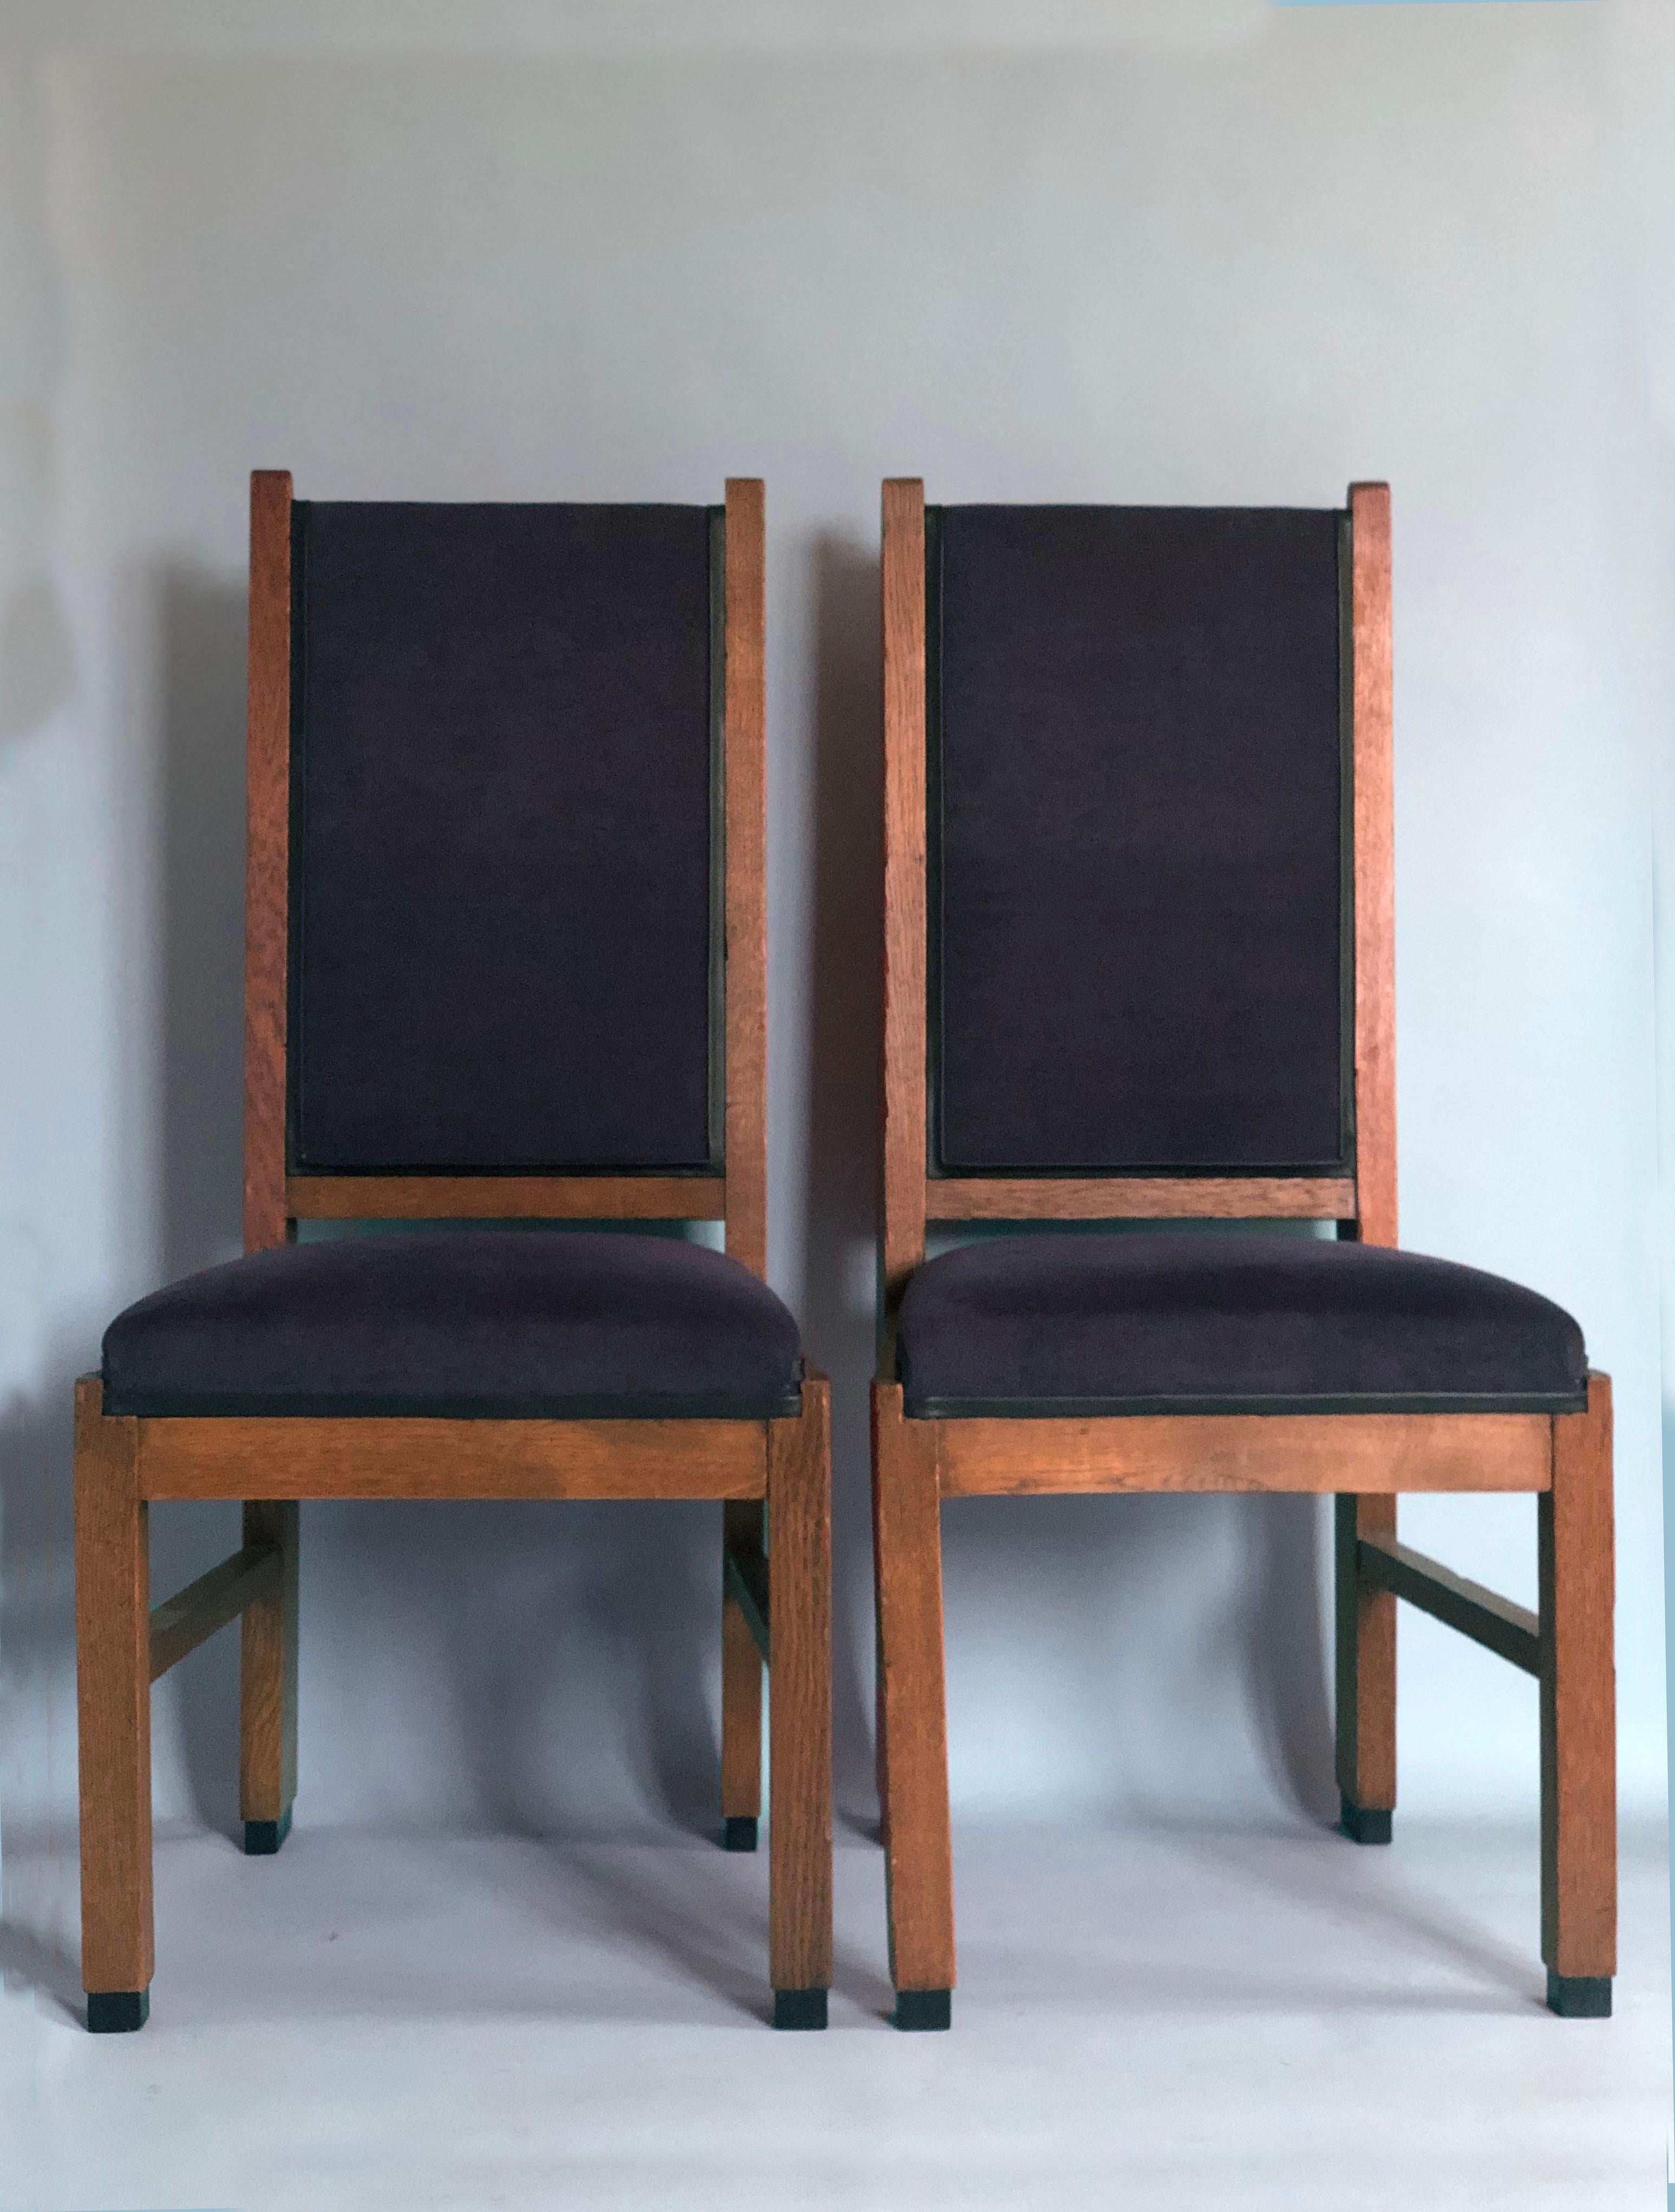 Art Deco Haagse School Dining Chair Frits Spanjaard 1930s Set of 2 In Good Condition For Sale In Bjuråker, SE